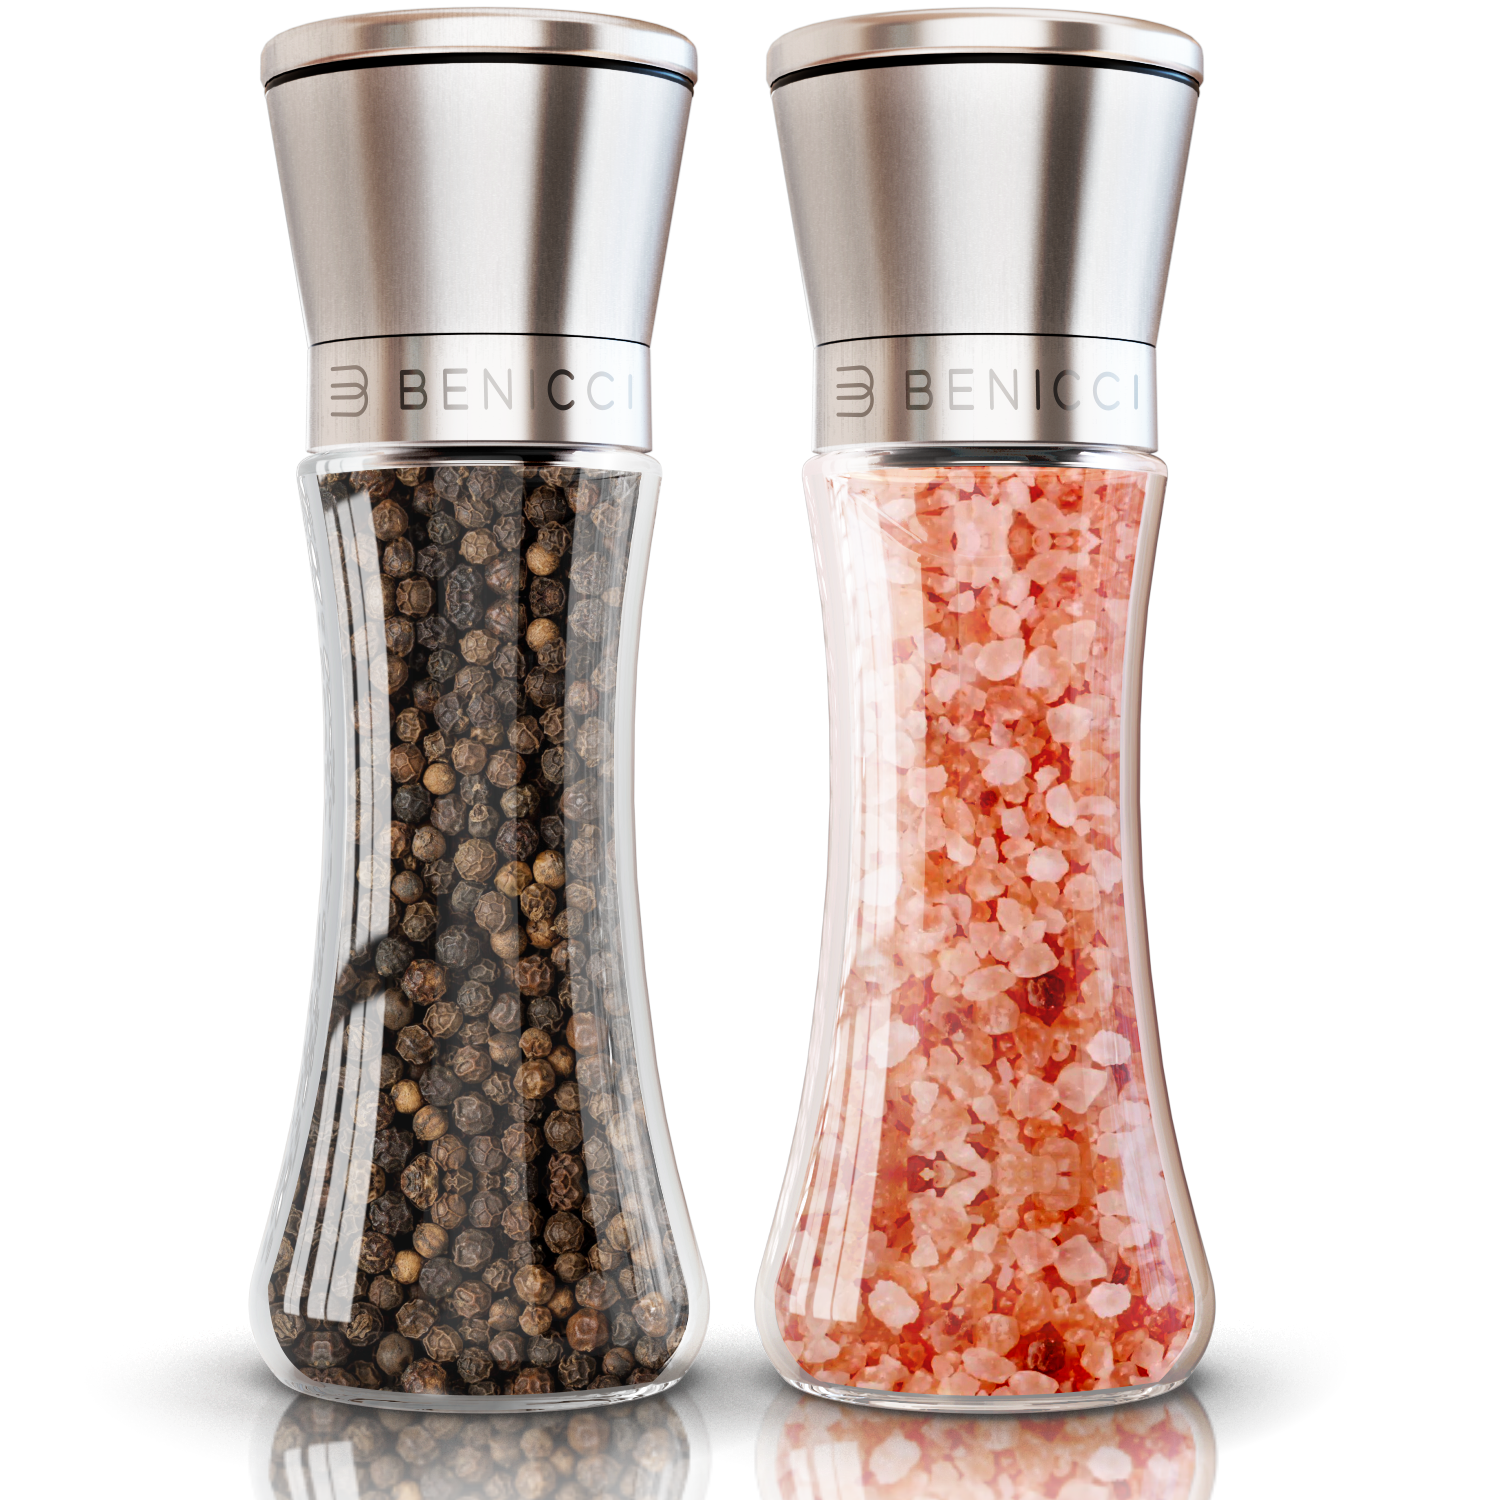 Beautiful Stainless Steel Salt & Pepper Grinders Refillable Set - Two 7 oz  Salt / Spice Shakers with Adjustable Coarse Mills - Easy Clean Ceramic